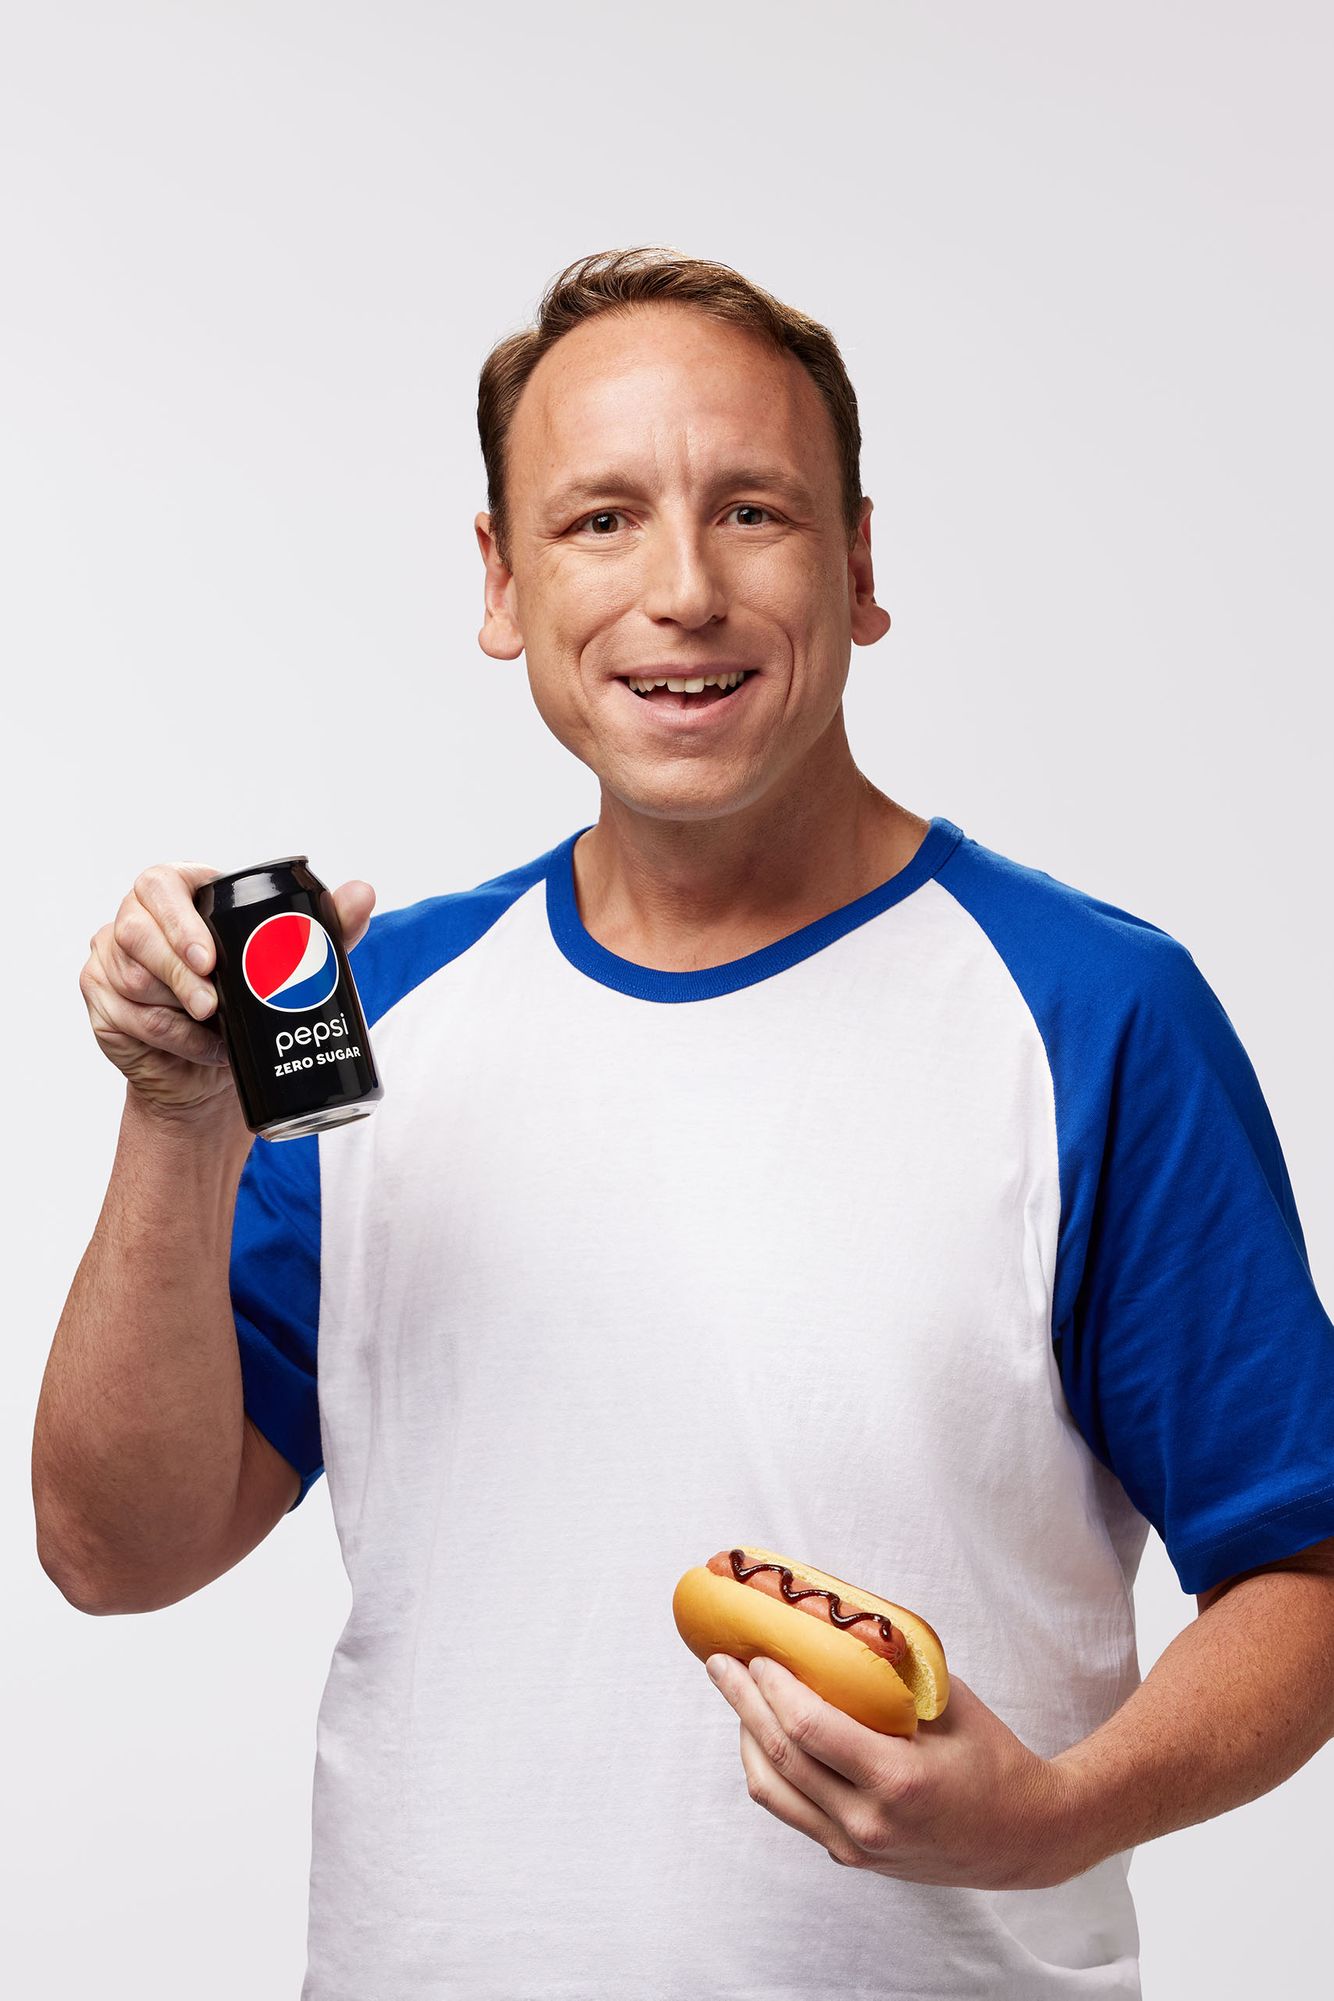 Competitive Eater Joey Chesnut for Pepsi by Chicago celebrity advertising photographer Jeff Schear